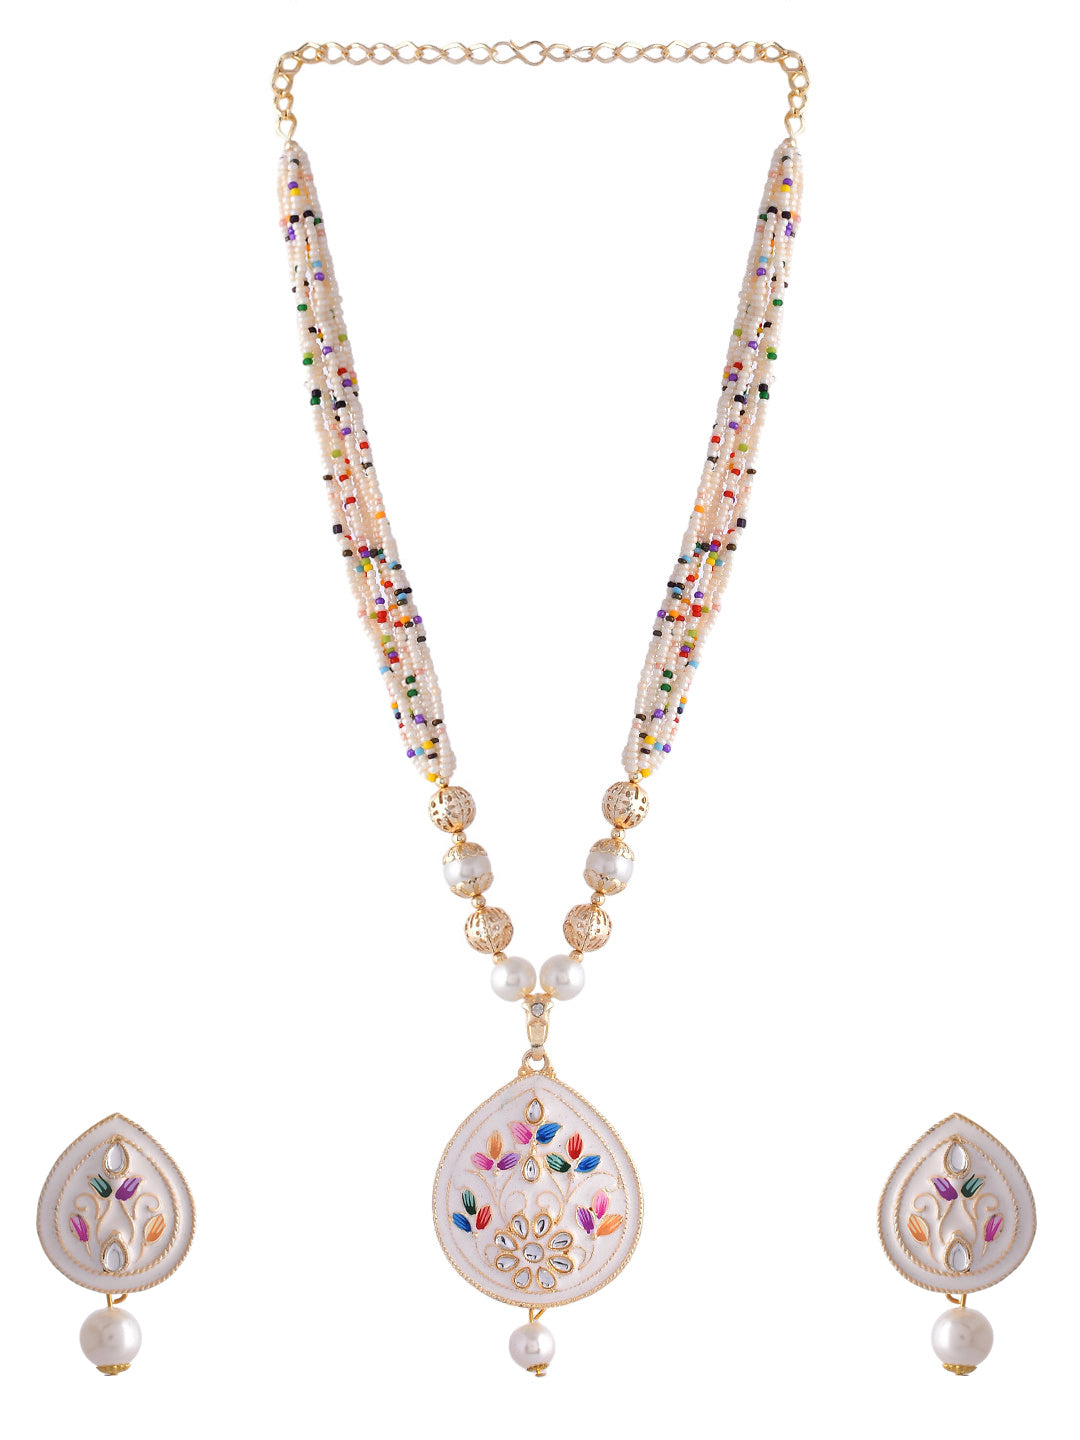 Women's White Pearl And Kundan Hand Painted Necklace With Earrings Jewellery Set - Voj